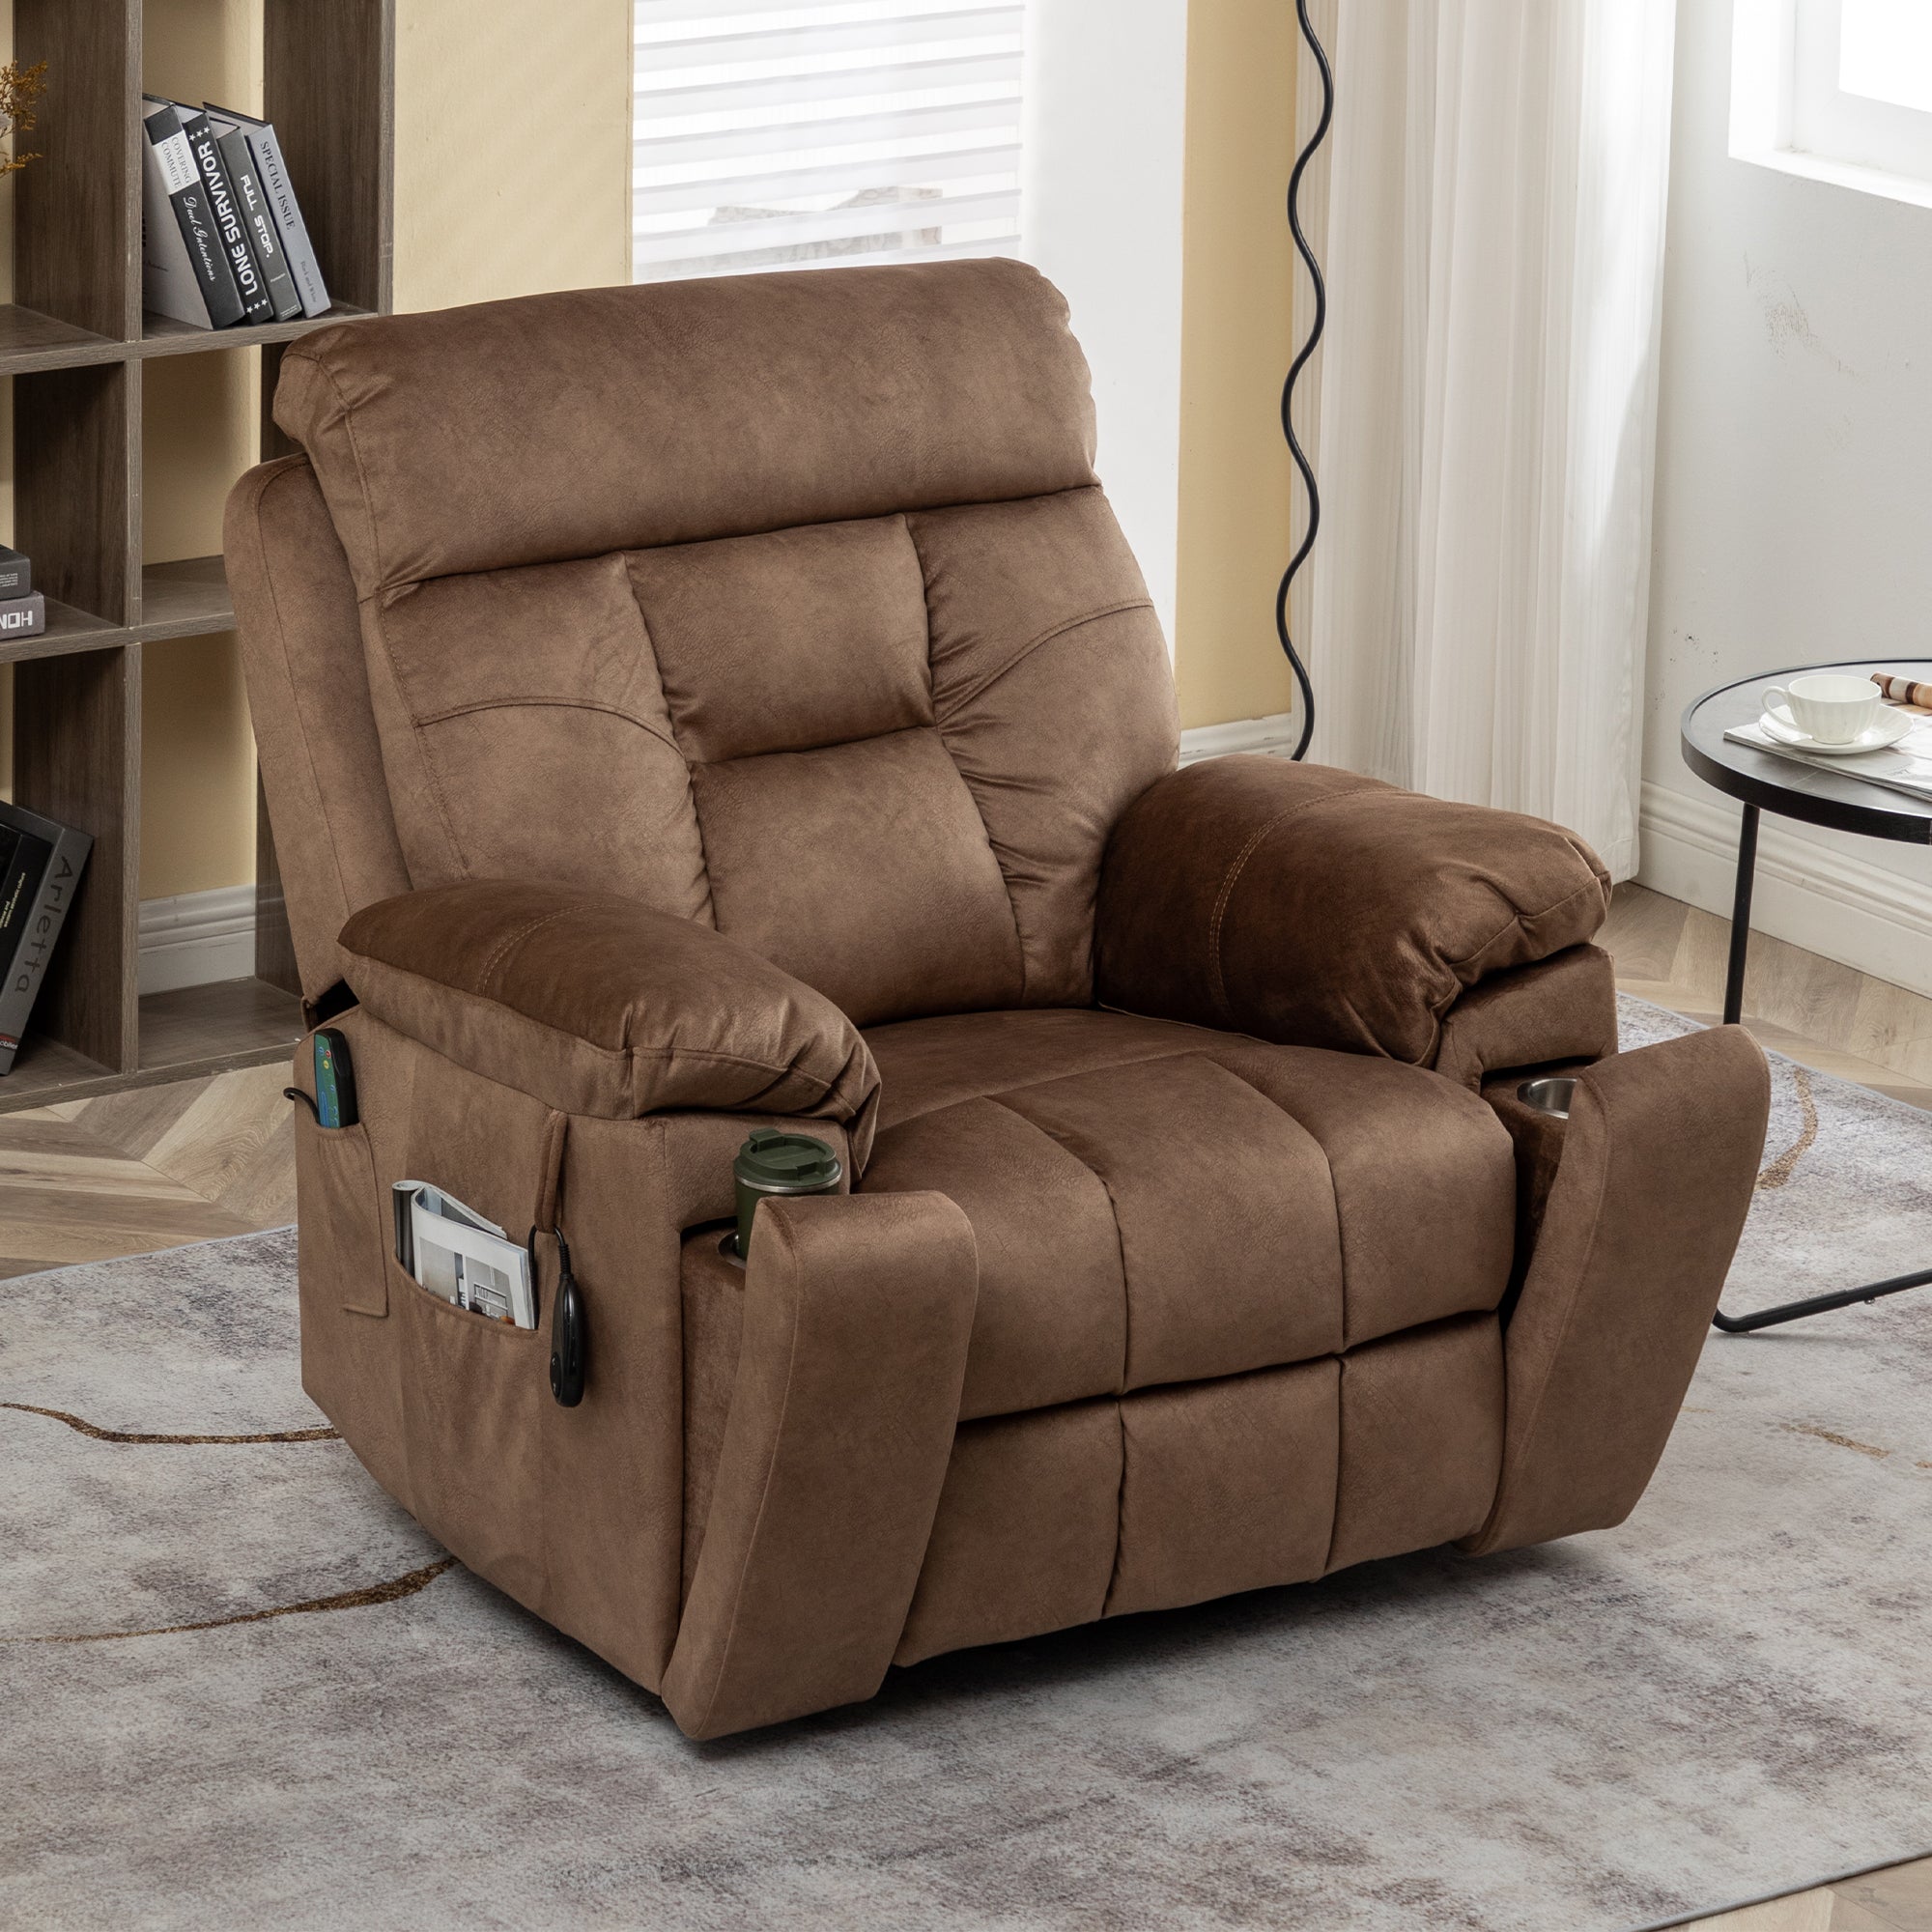 uhomepro Large Electric Massage Recliner with Heat, Fabric Lift Reclin -  Uhomepro